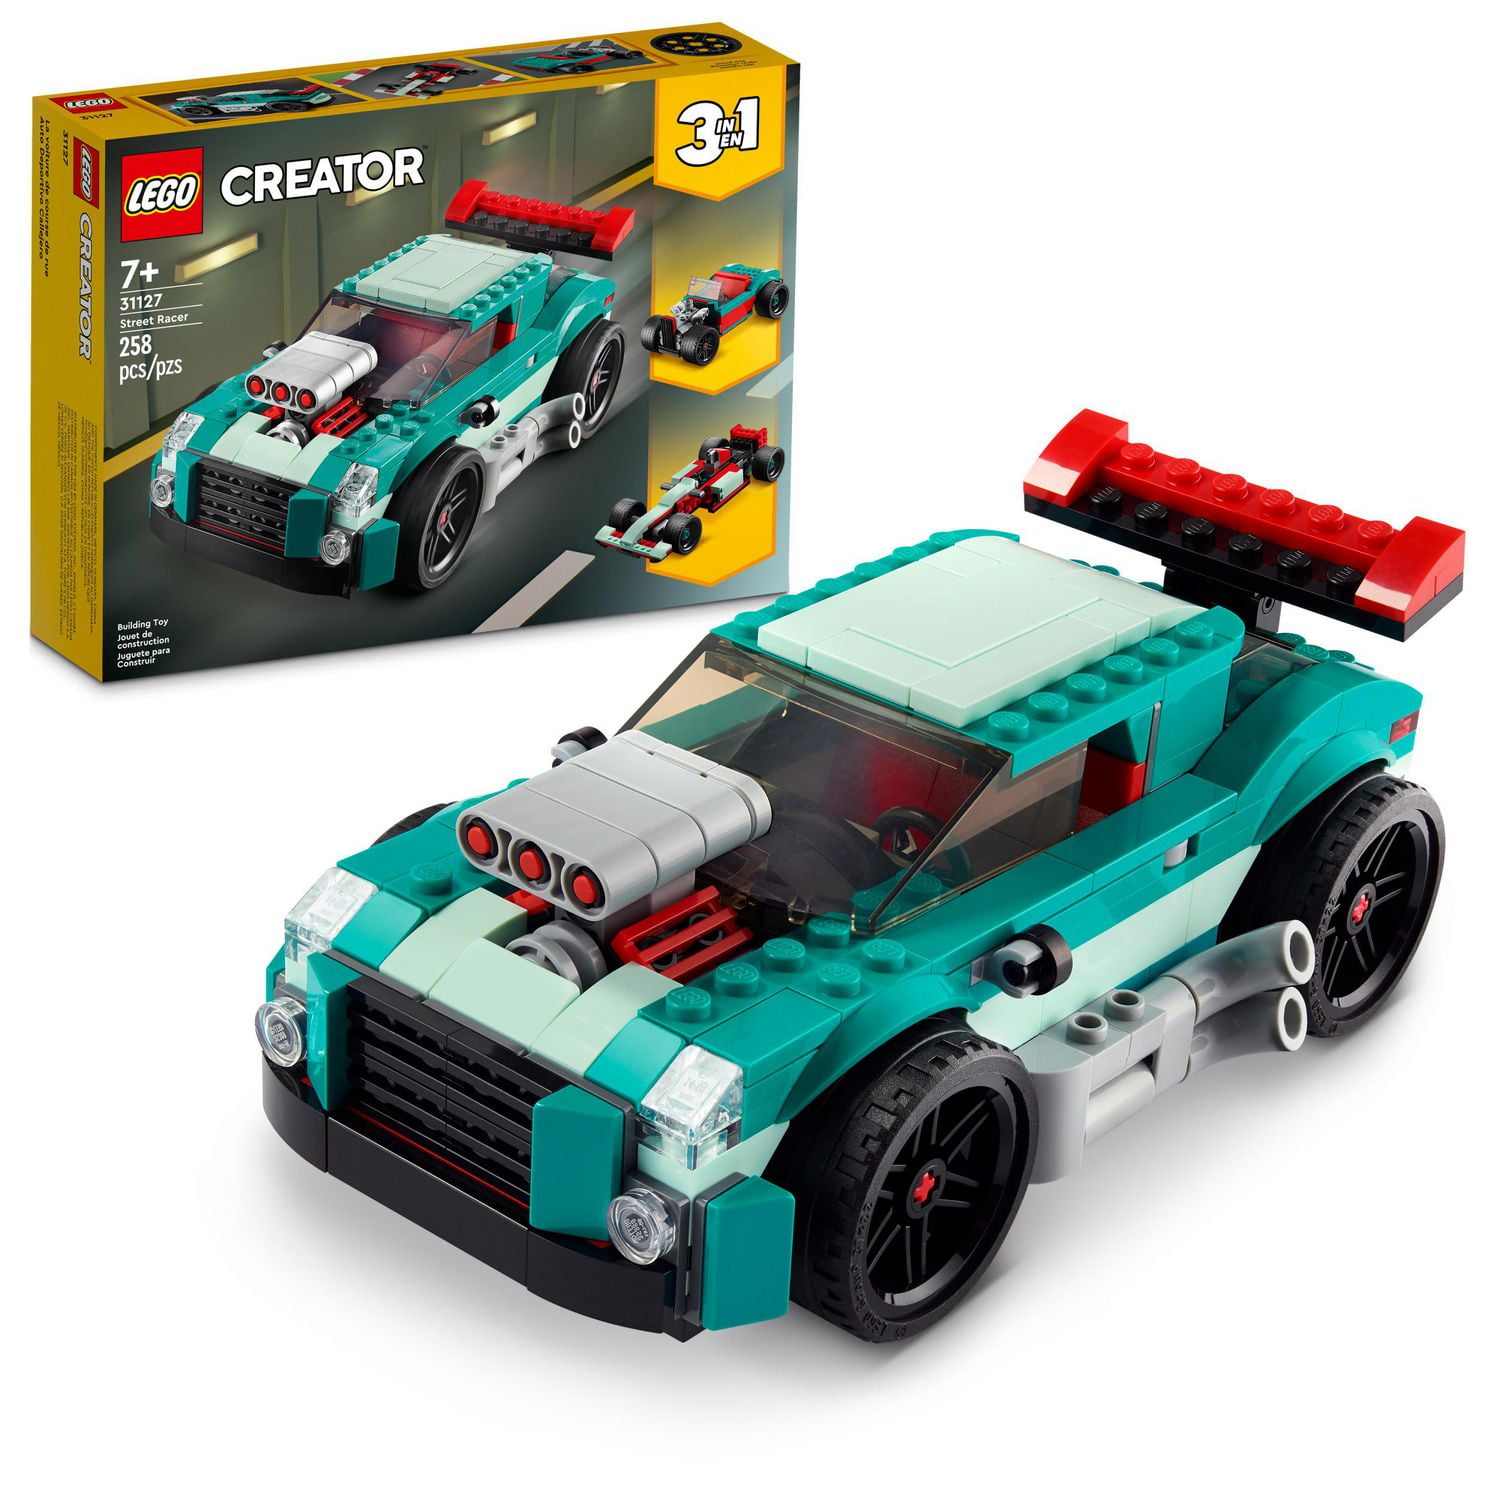 LEGO Creator 3in1 Street Racer 31127 Toy Building Kit (258 Pieces) 